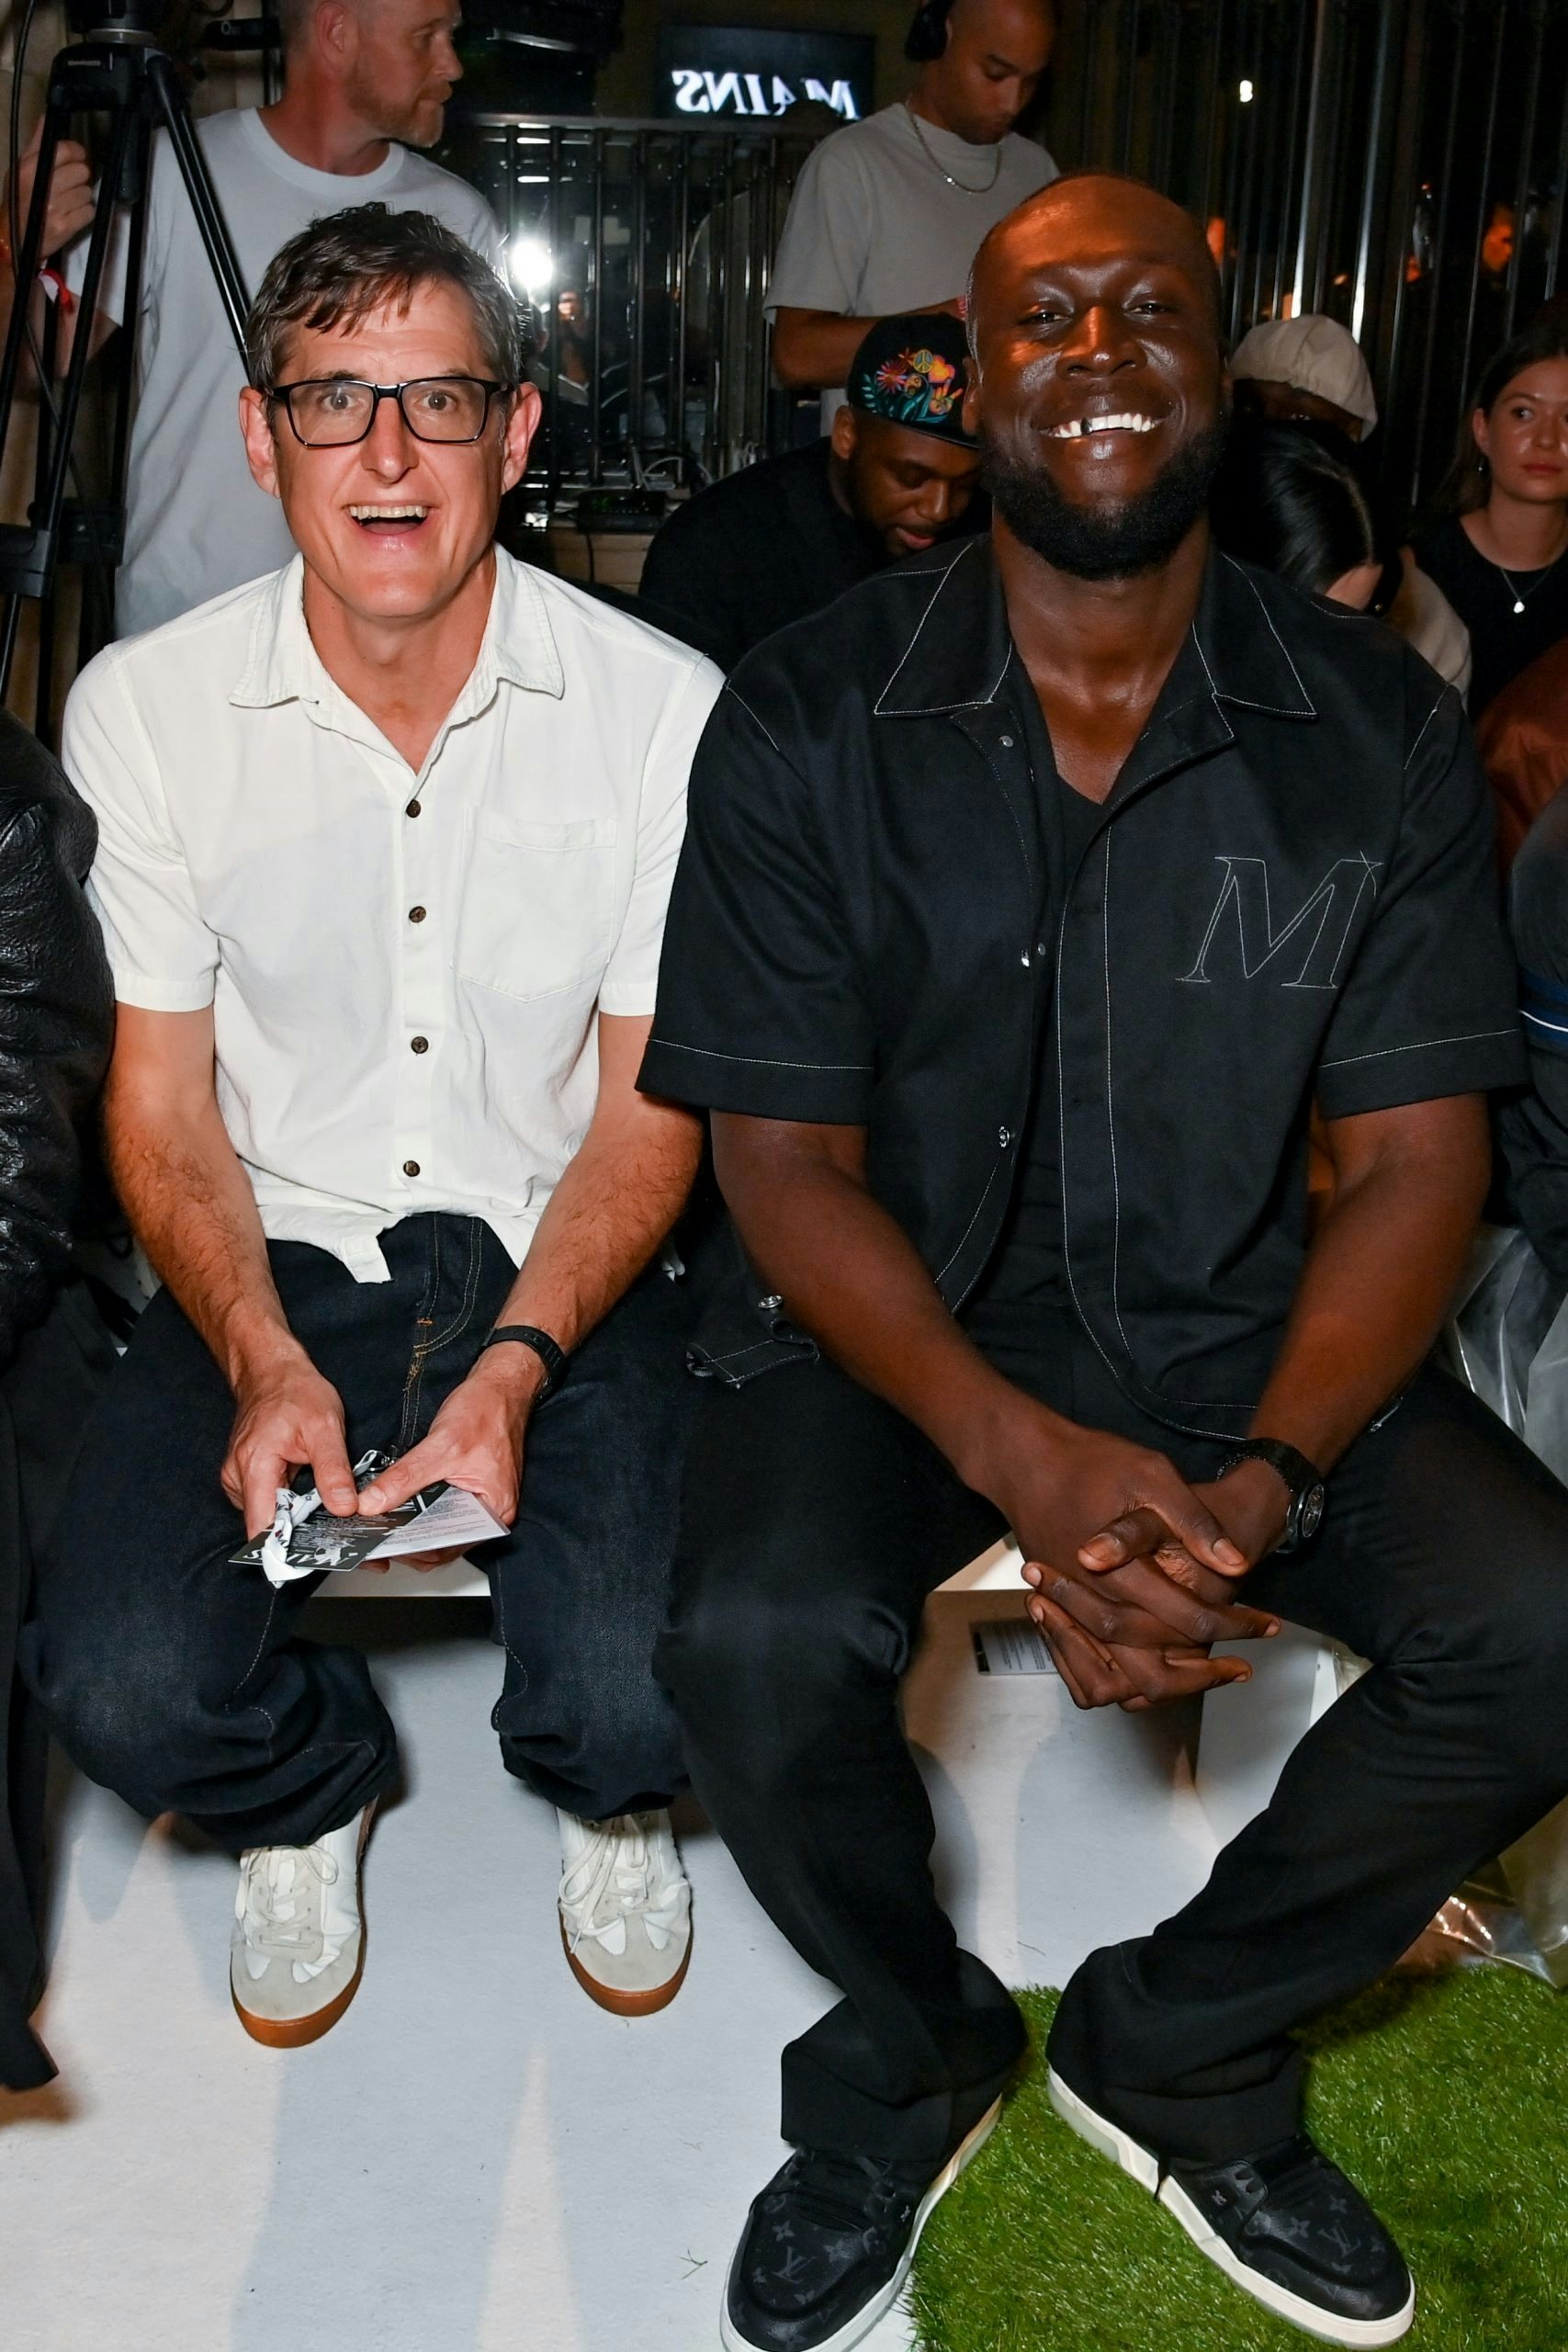 Louis Theroux and Stormzy at the Mains show. Photo: Dave Benett amp; Jed Cullen, Getty Images